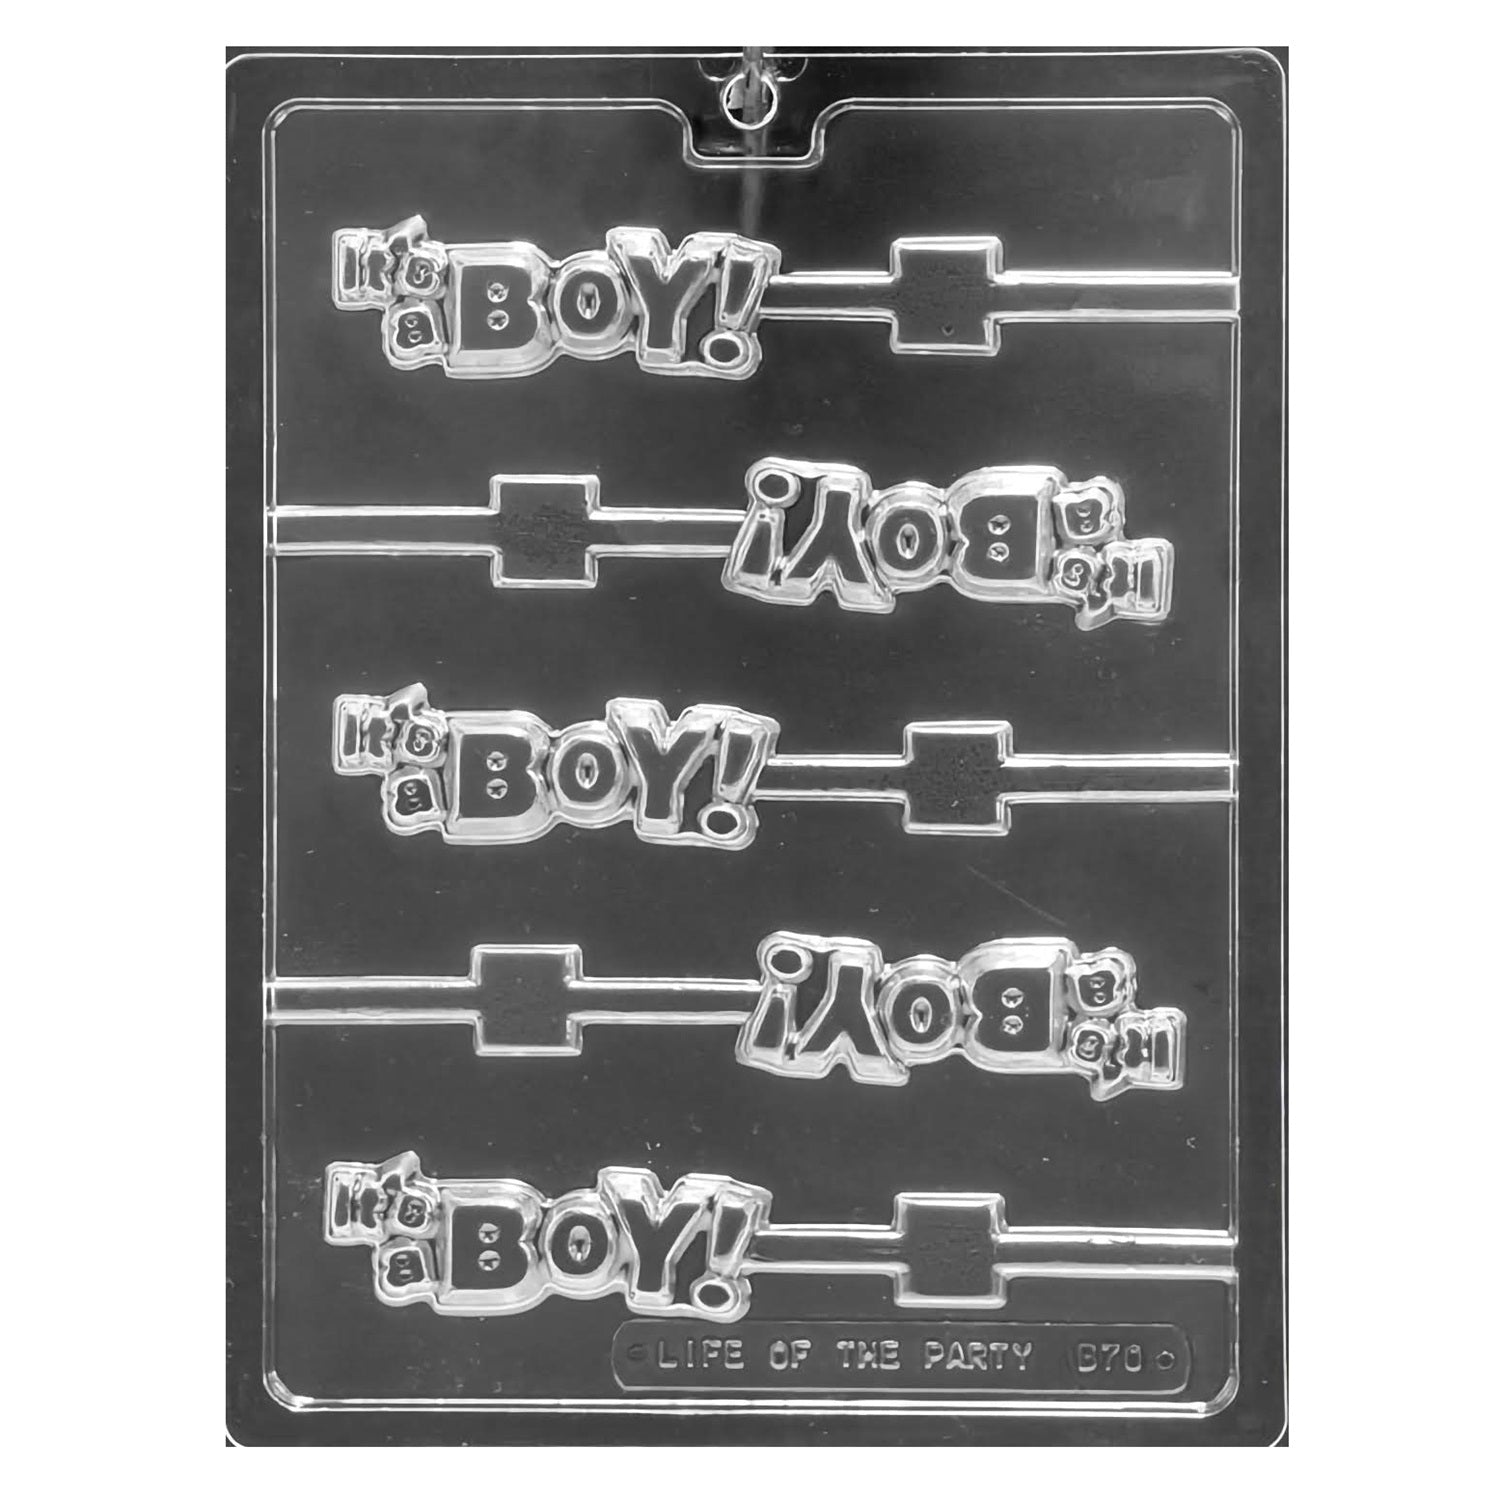 Plastic chocolate mold for creating 'It's a Boy' themed lollipop treats, featuring bold, celebratory text, ideal for baby showers and gender reveal parties.